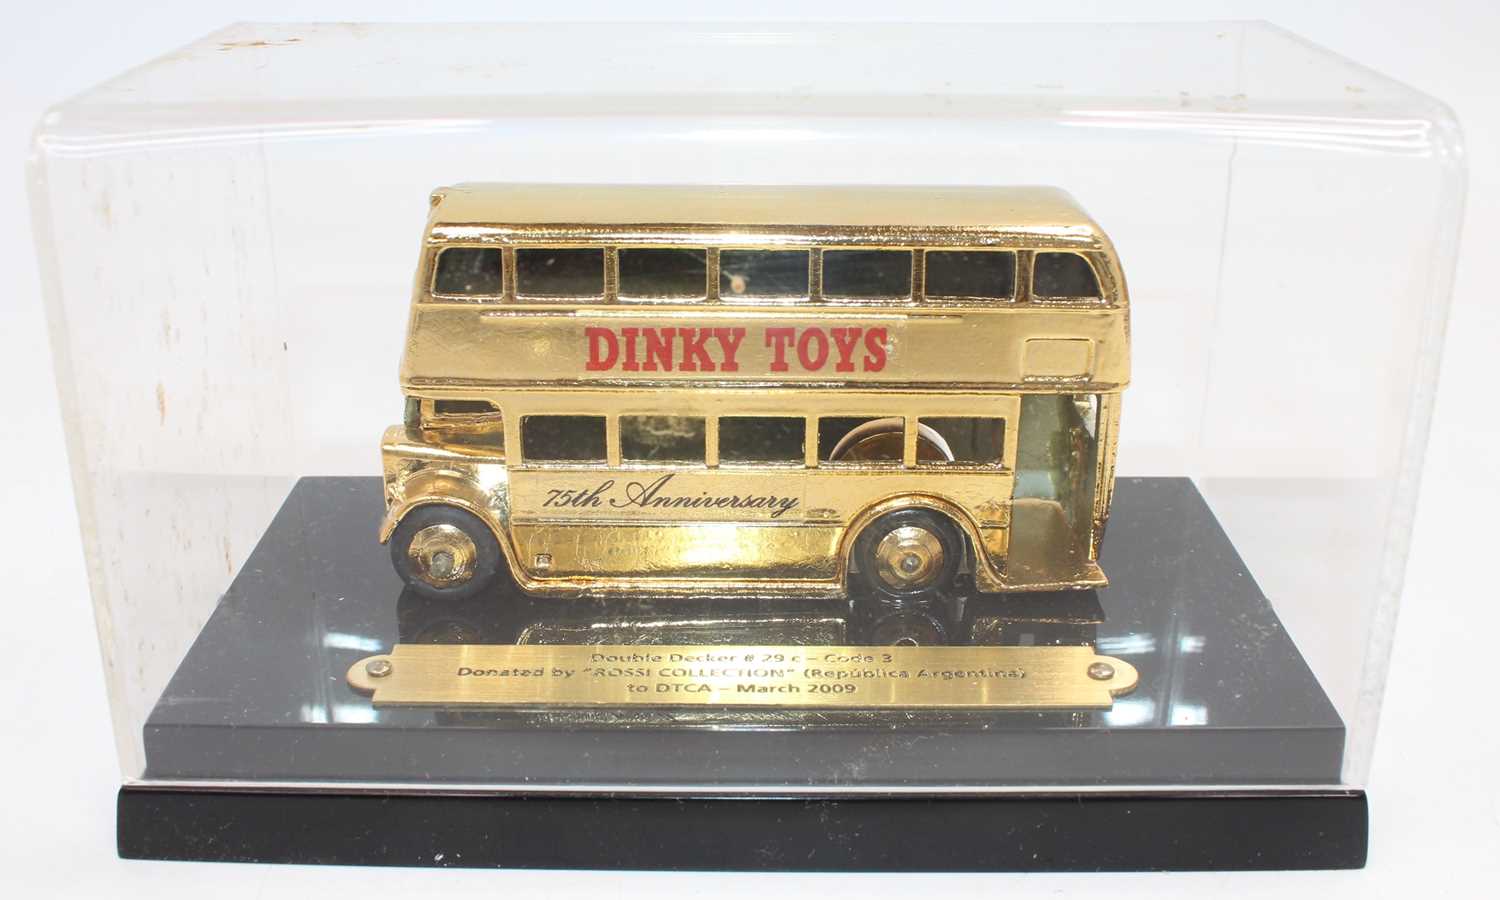 Dinky Toys Special Code 3, of the 29c Double Decker bus in "Dinky Toys" livery, finished in gold - Image 2 of 2